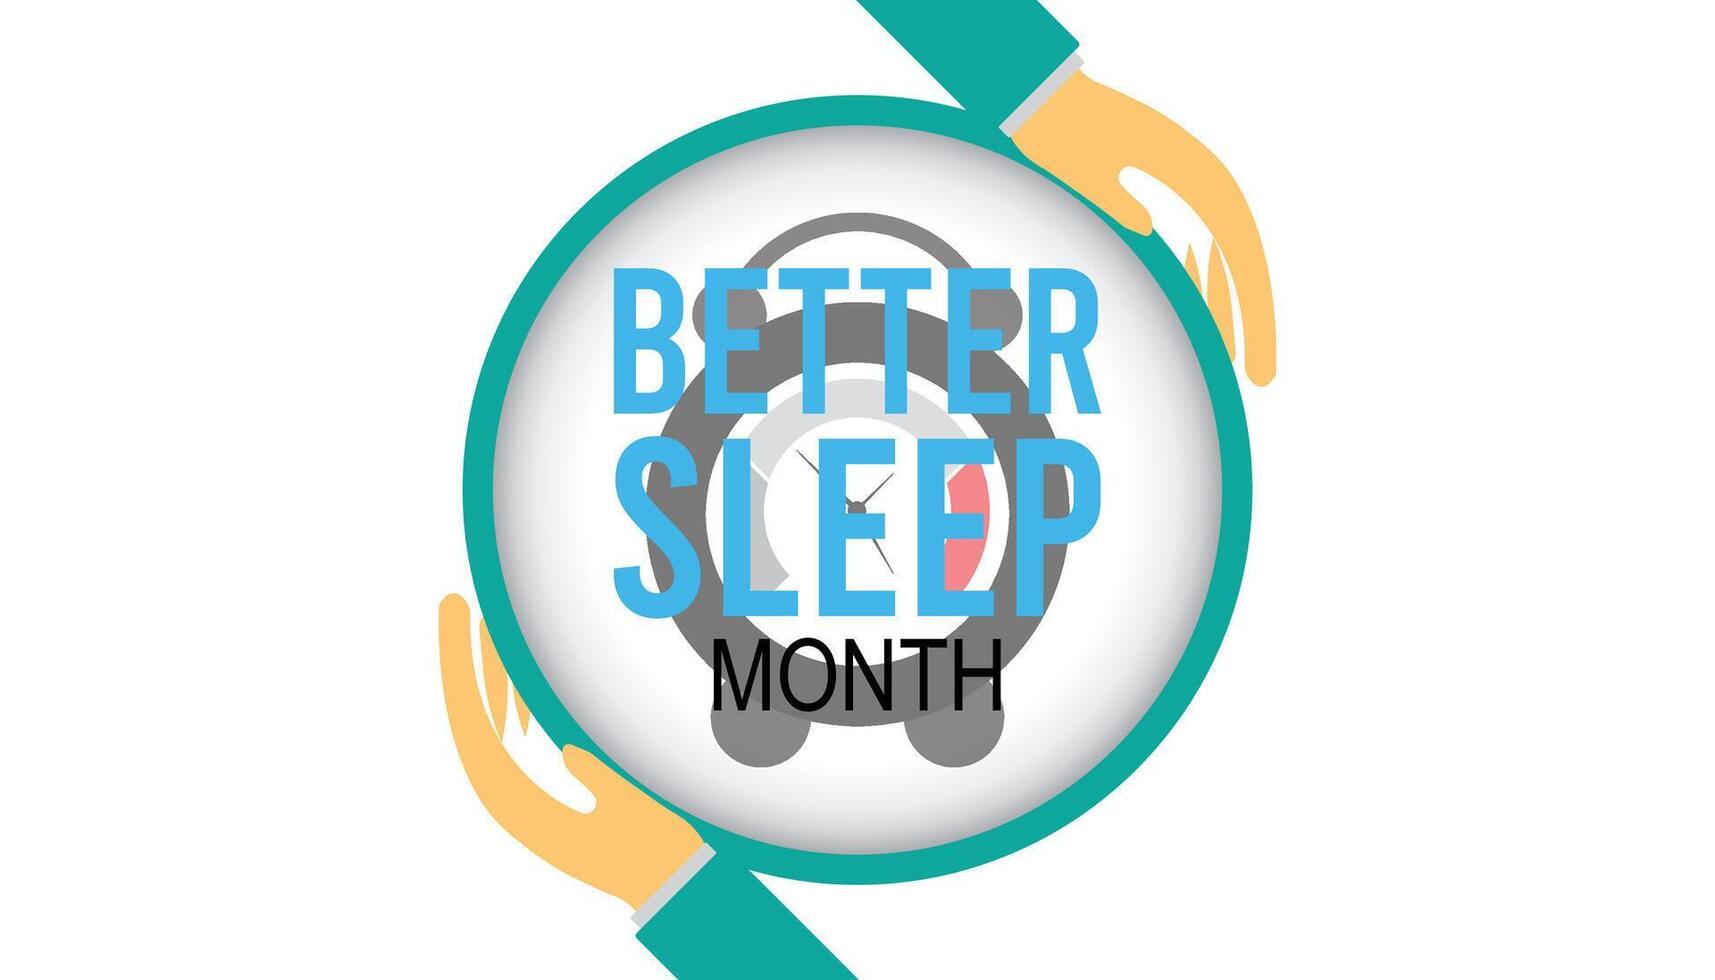 Better Sleep Month observed every year in May. Template for background, banner, card, poster with text inscription. vector